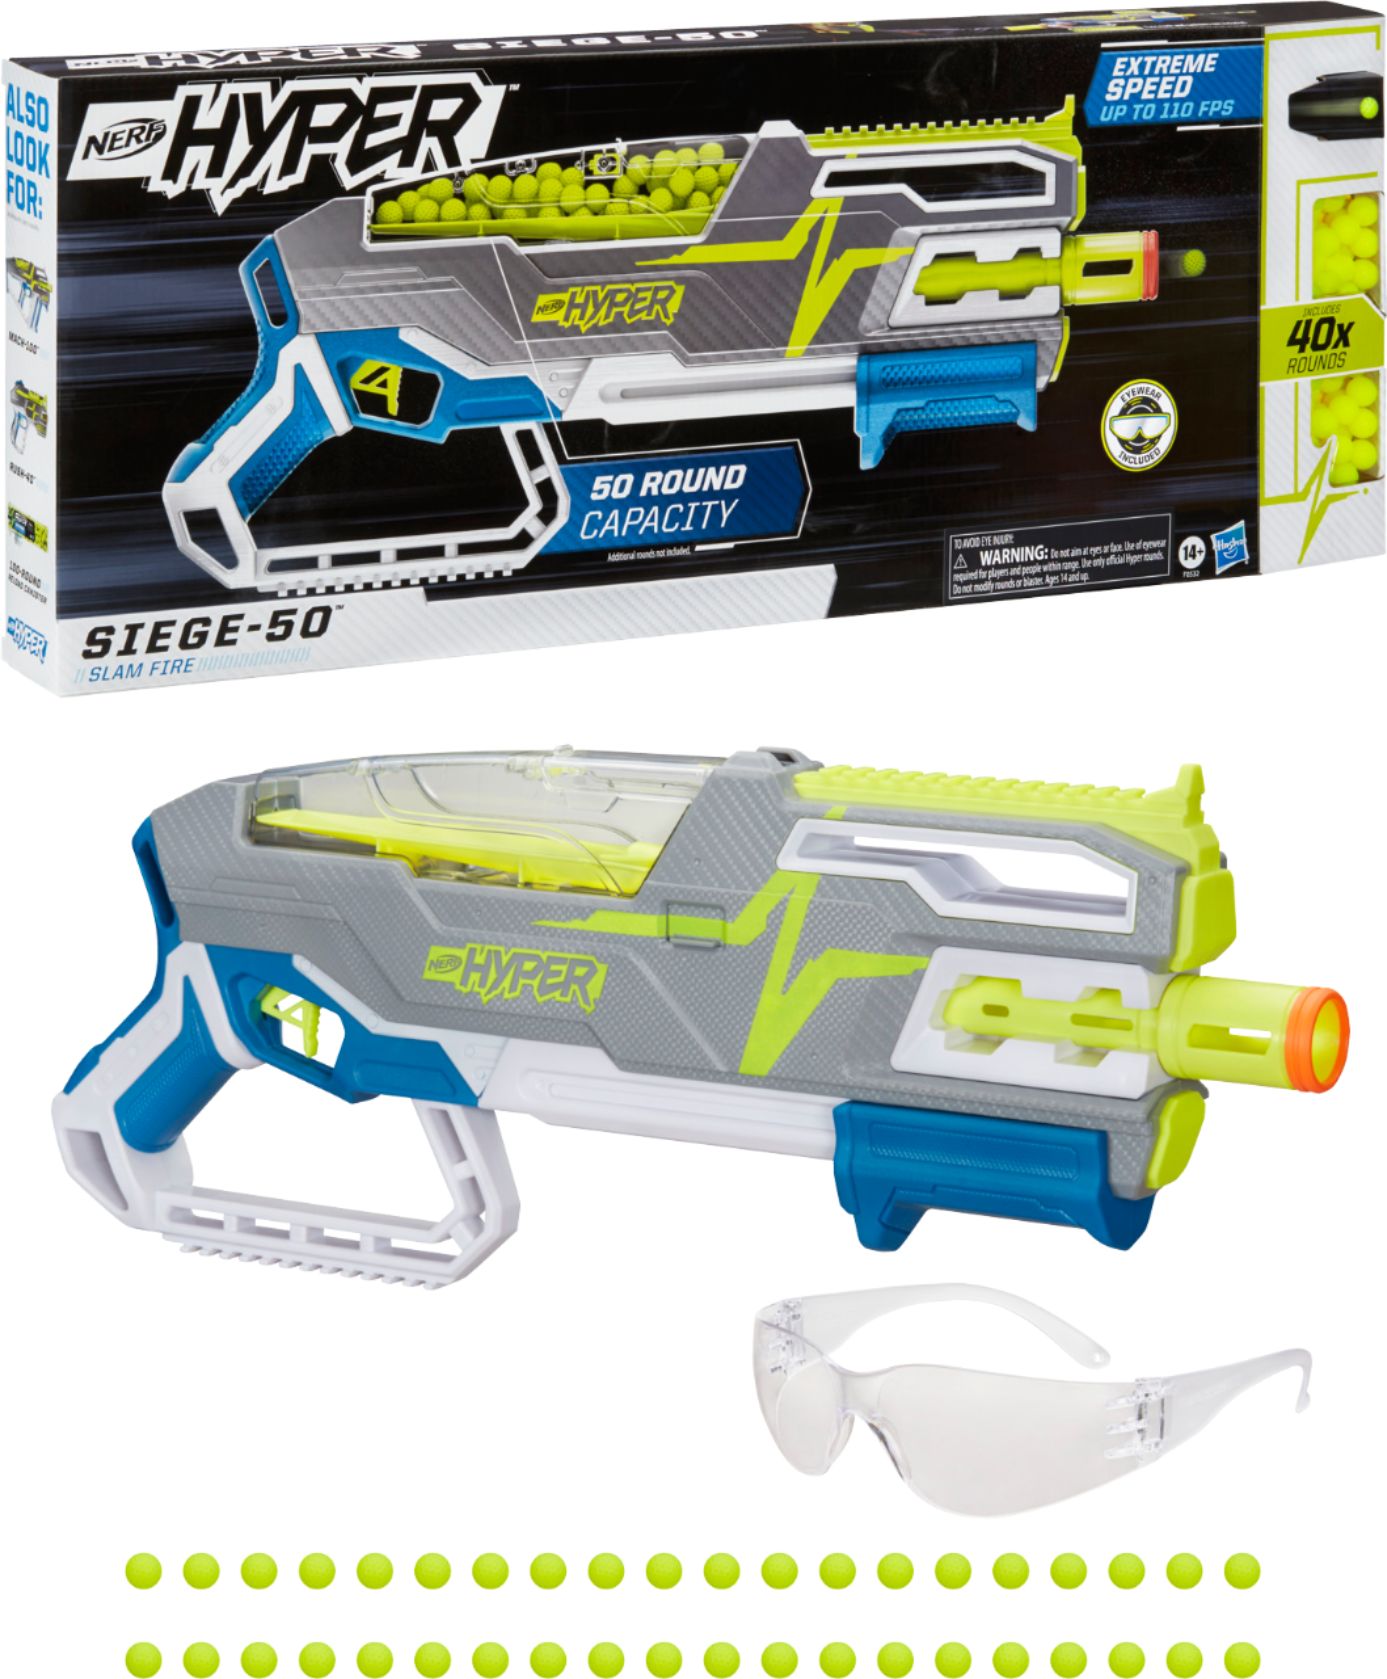 Nerf Hyper Siege-50 Pump-Action Blaster and 40 Nerf Hyper Rounds, 110 FPS Velocity